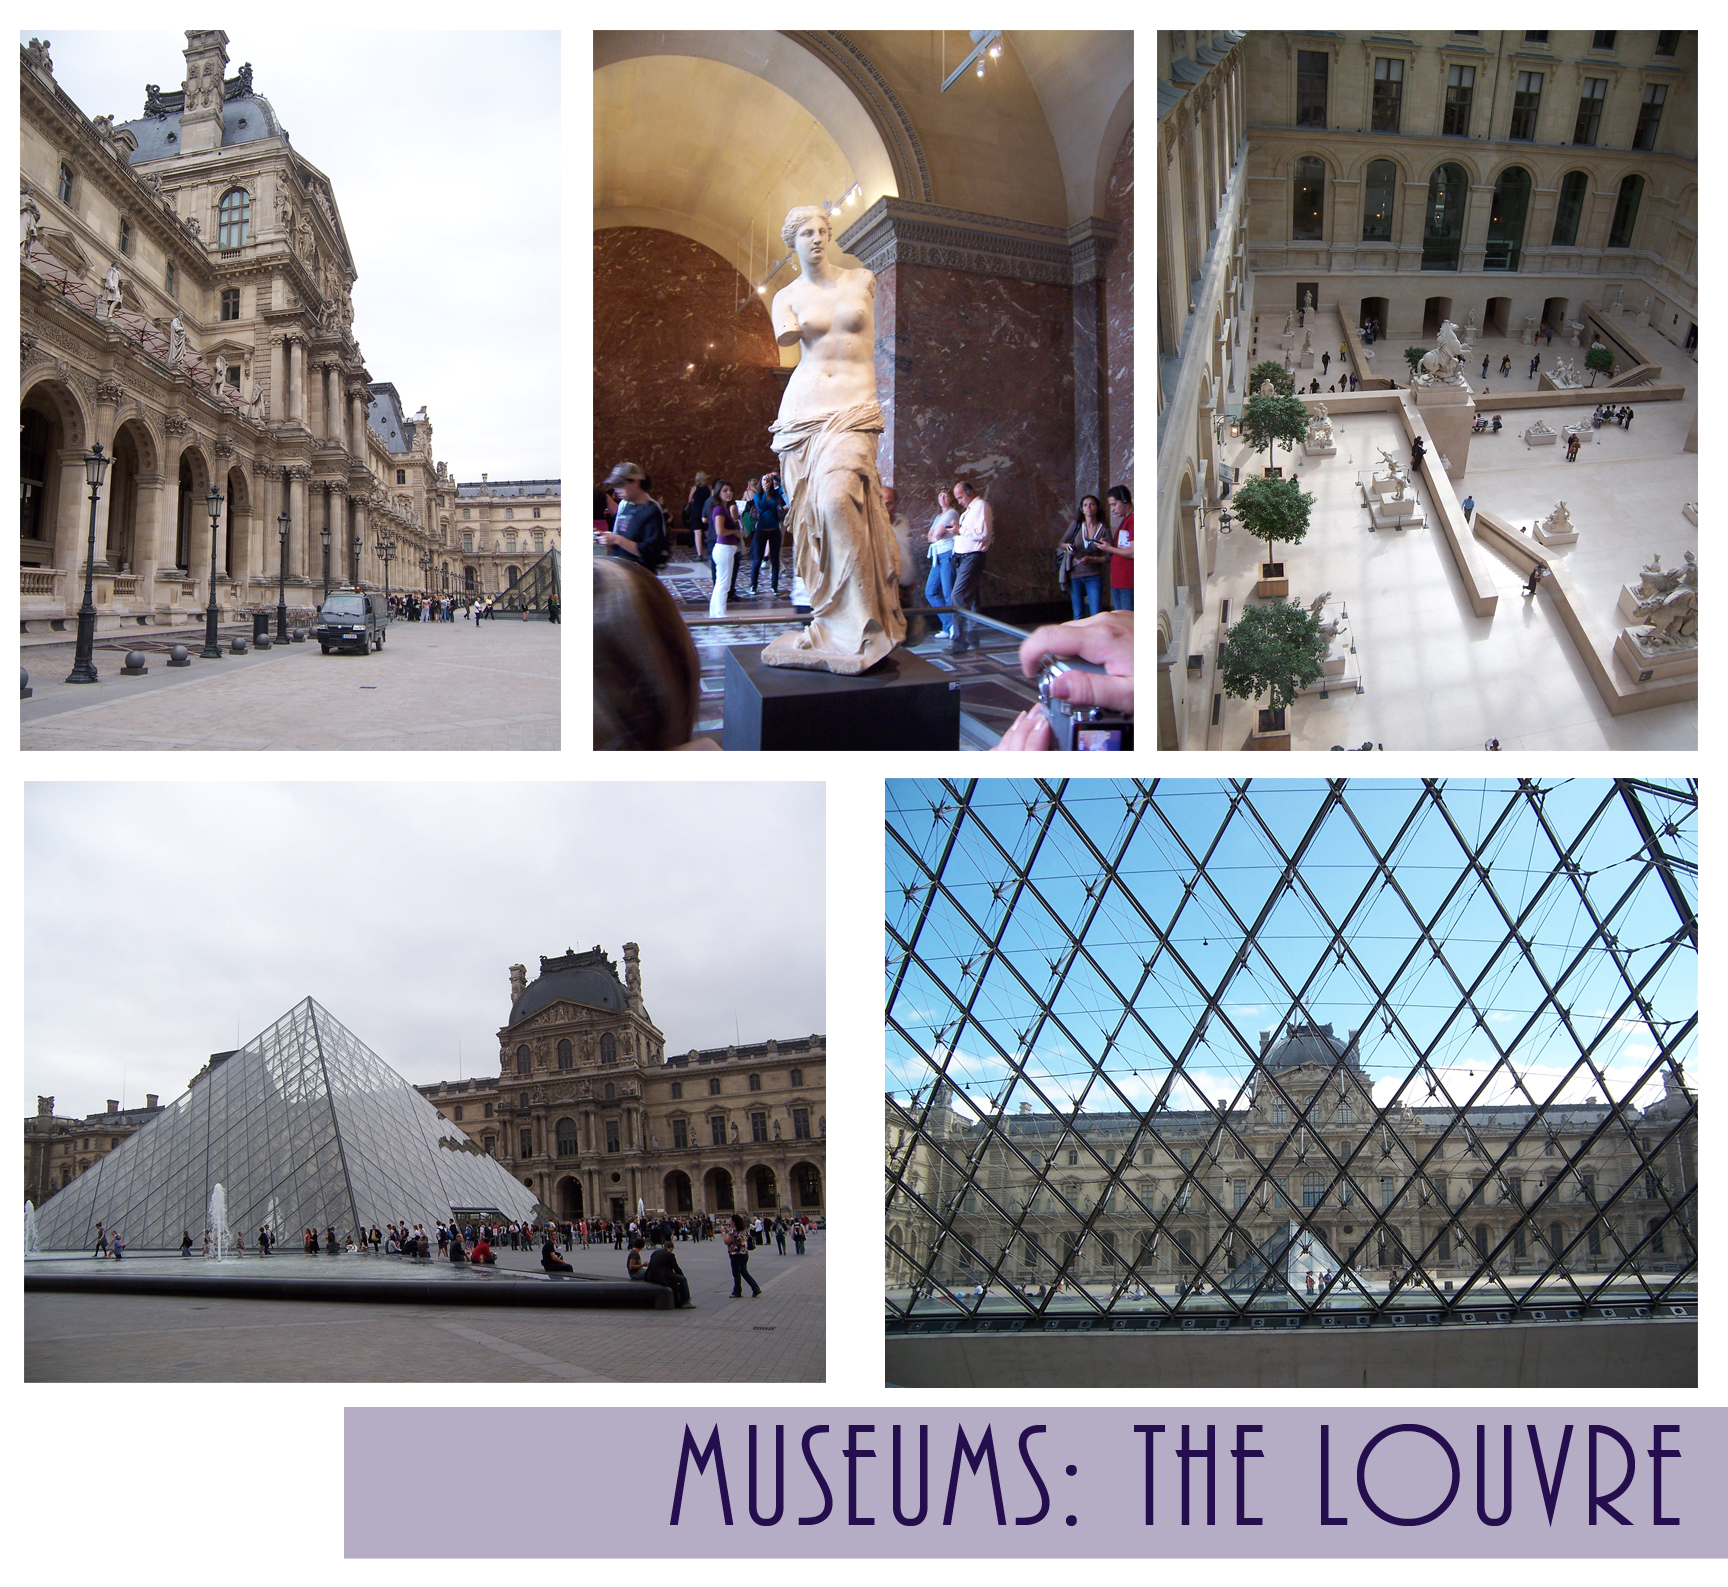 Time to Get Away - Museums - The Louvre